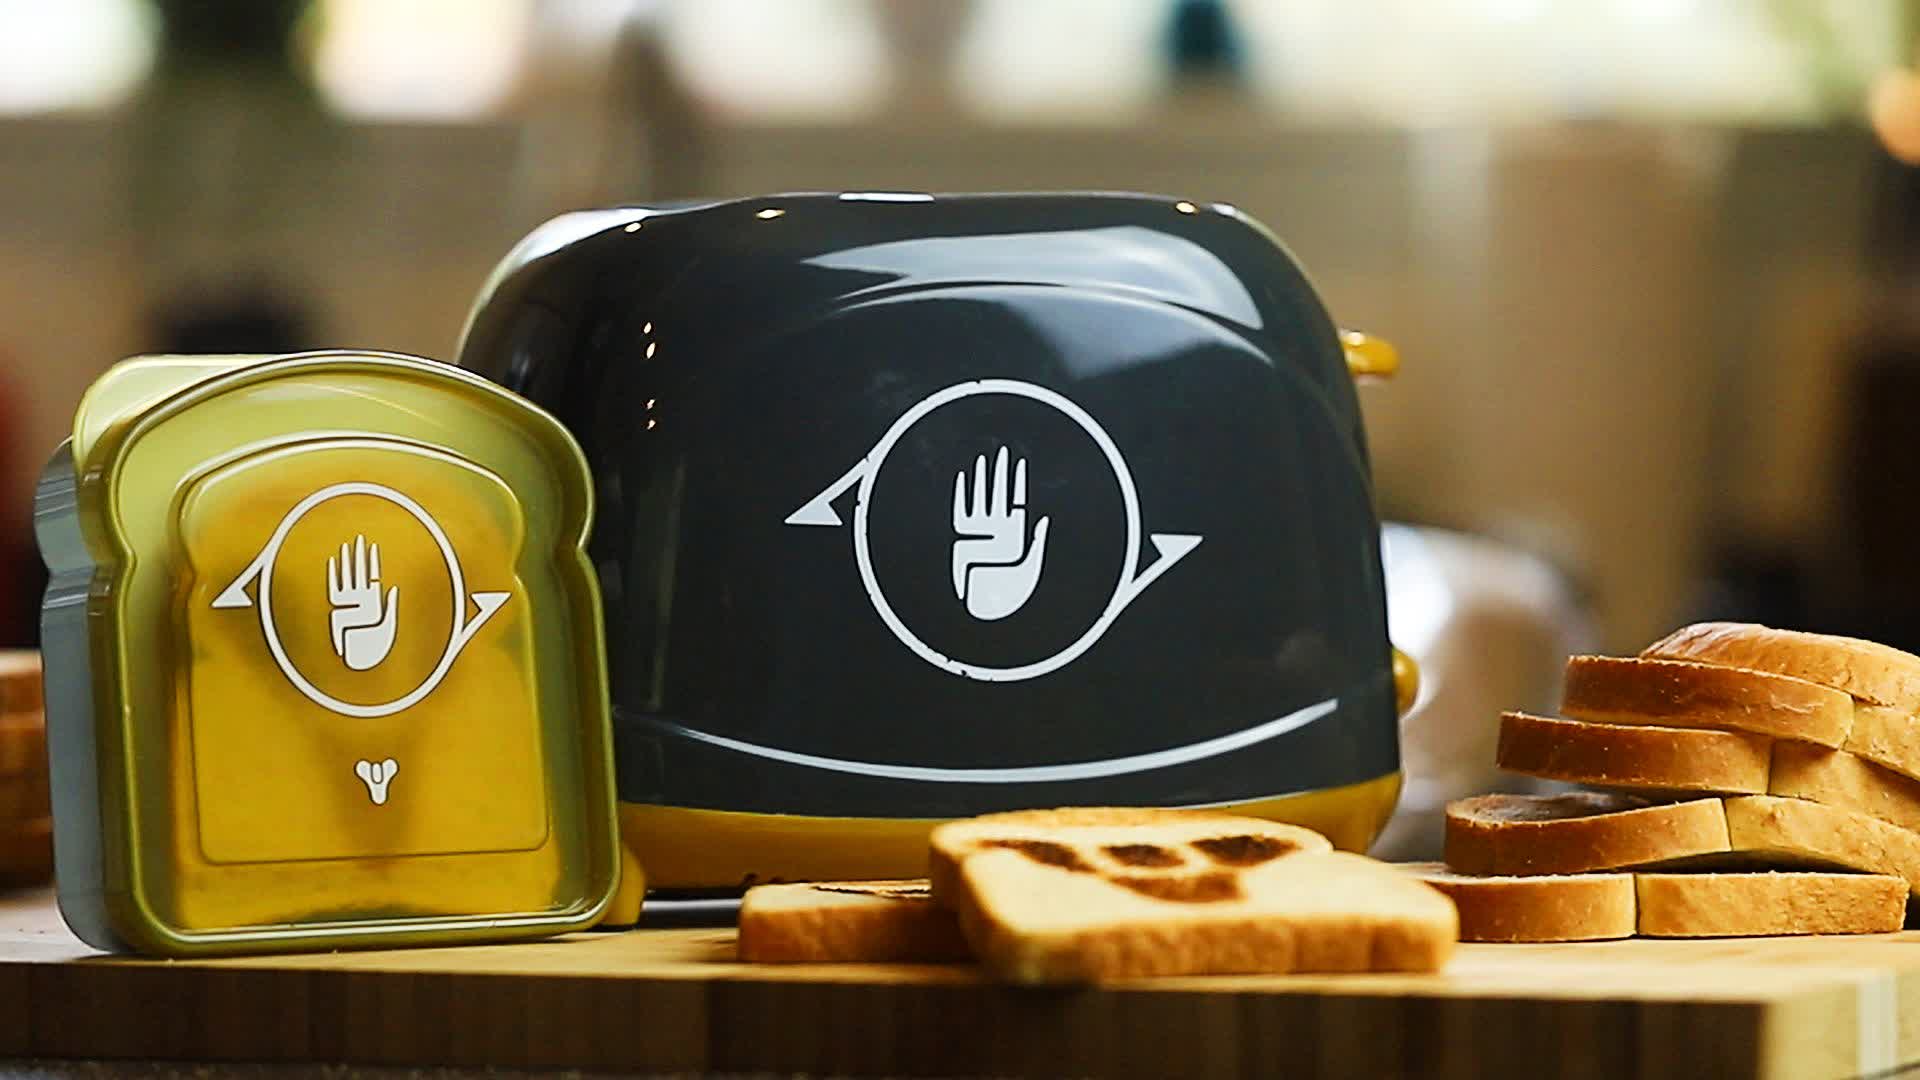 Bungie opens pre-orders for its Destiny toaster